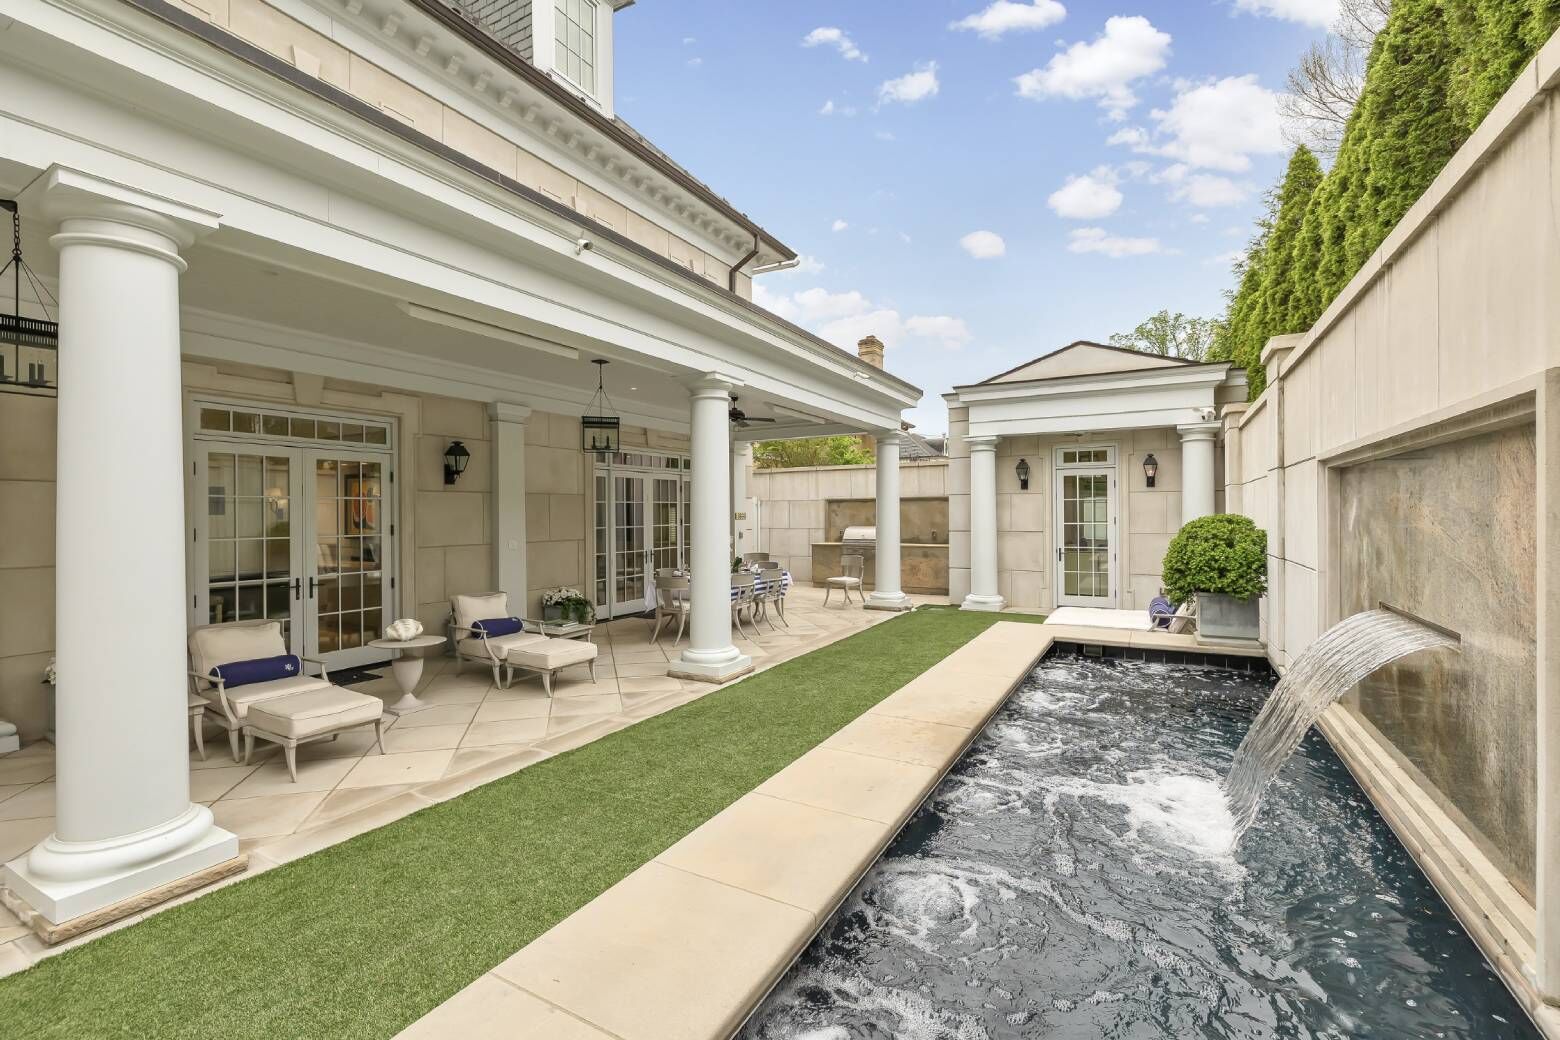 The 11,000-square-foot, five-bedroom home originally custom-built for Fox News host Brett Baier and his wife Amy in Northwest D.C.s exclusive Phillips Park neighborhood 14 years ago, has sold for $7.1 million. (Courtesy TTR Sothebys International/Derek &amp; Vee Photography)